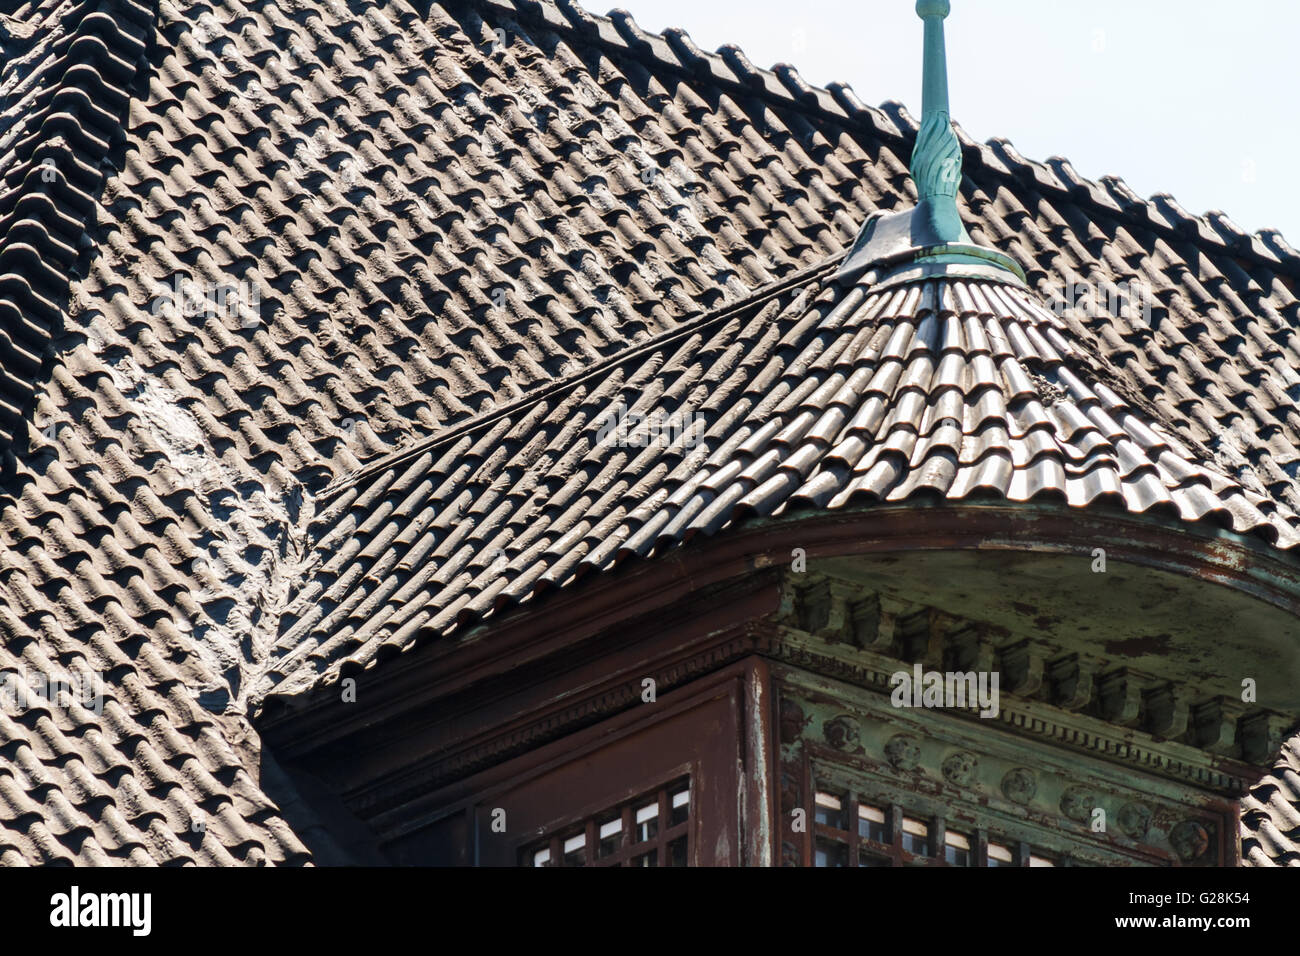 Geometrical shapes created by a tiled roof of an old house Stock Photo